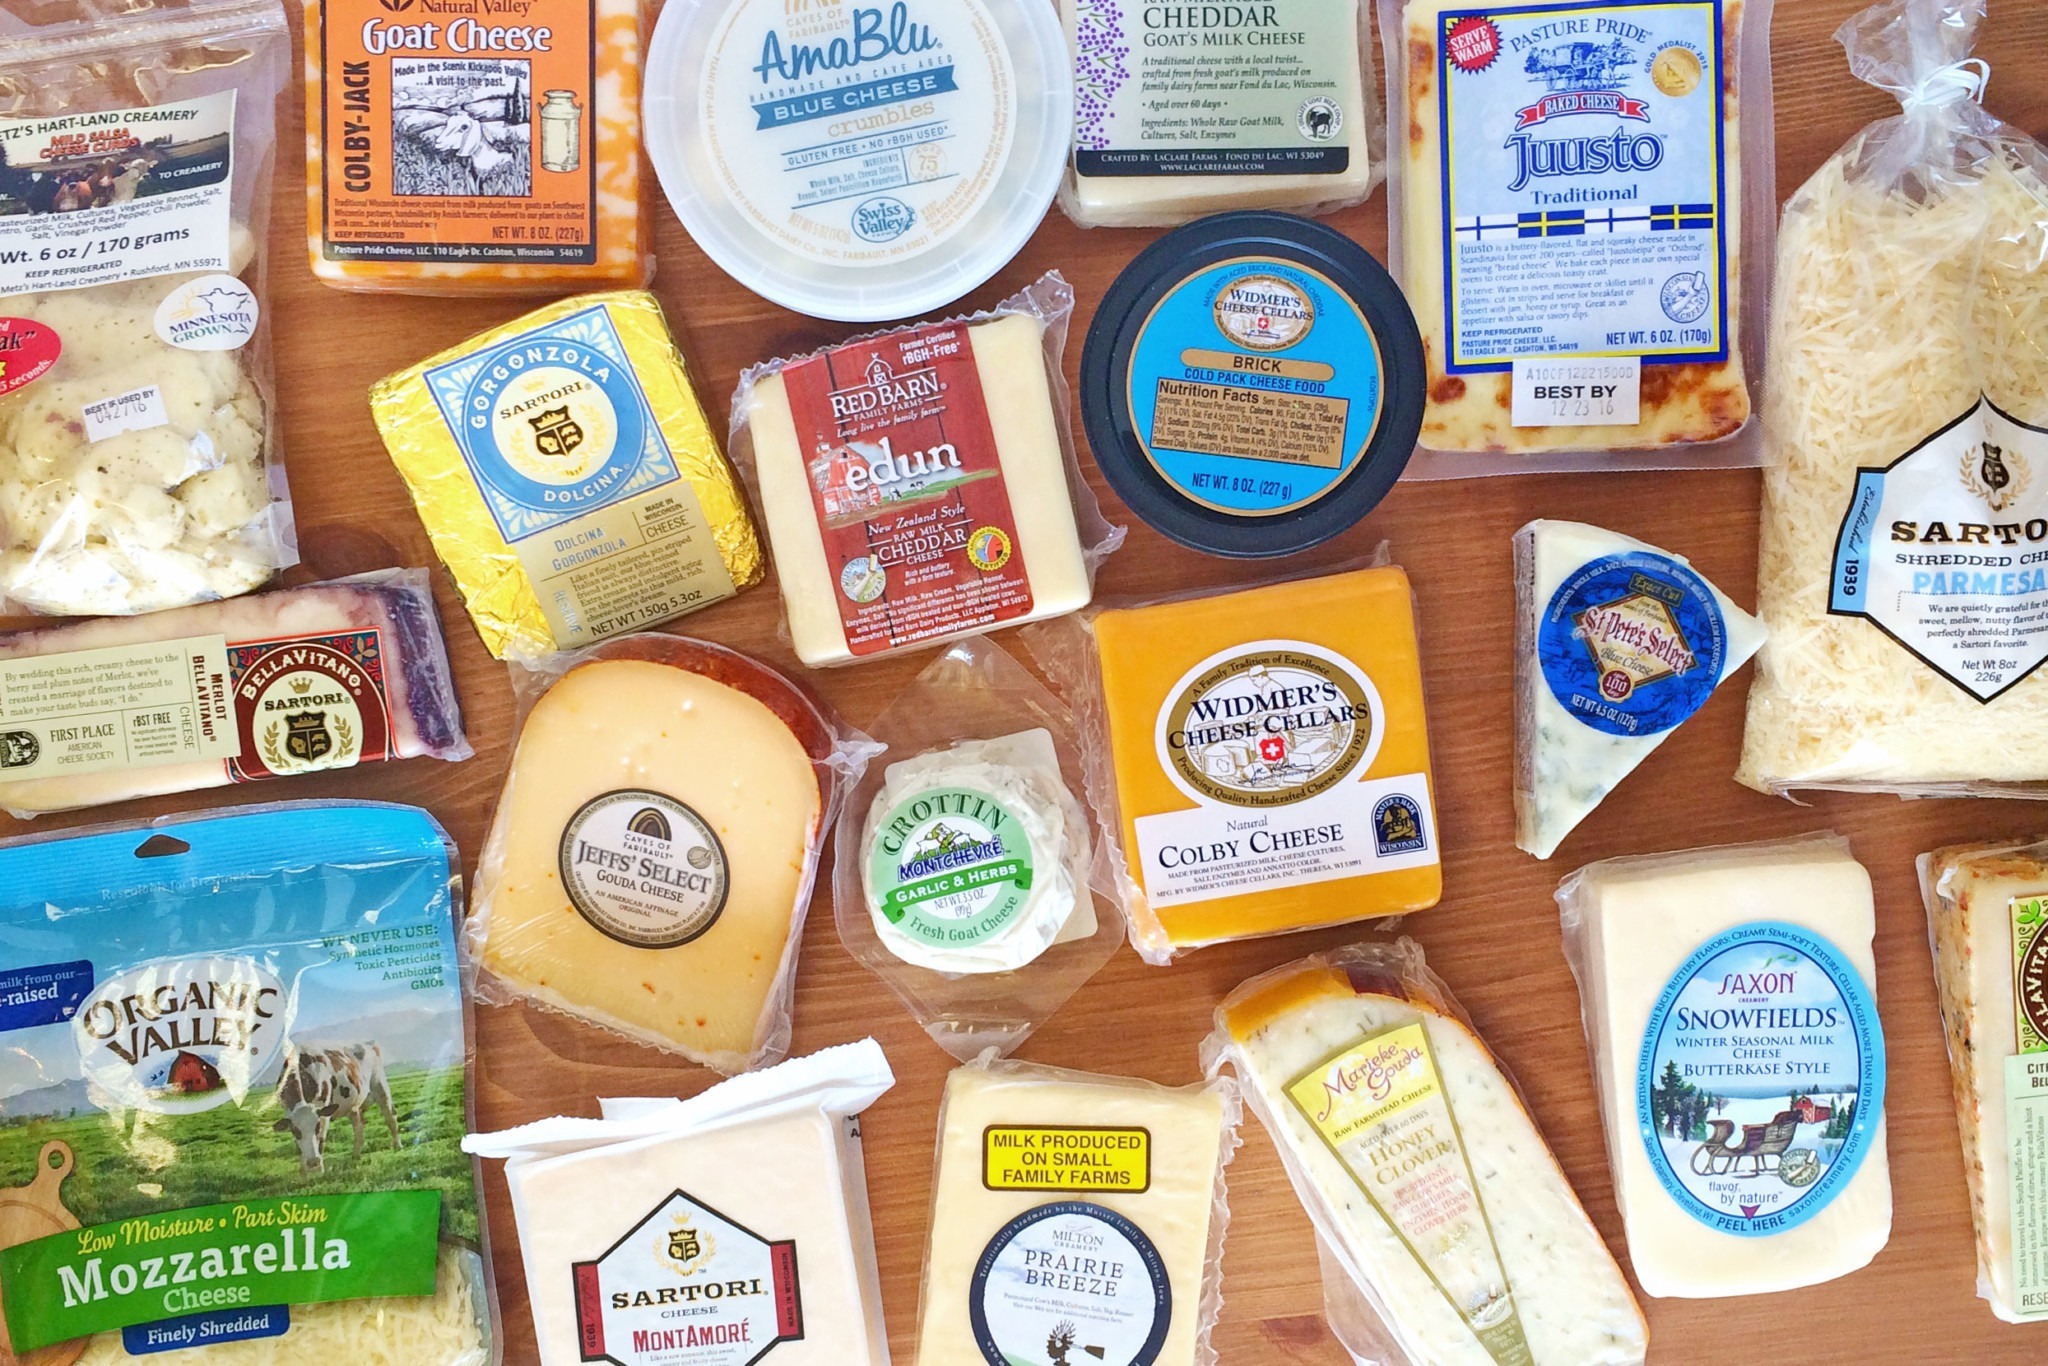 Large array of cheese products on a wooden table